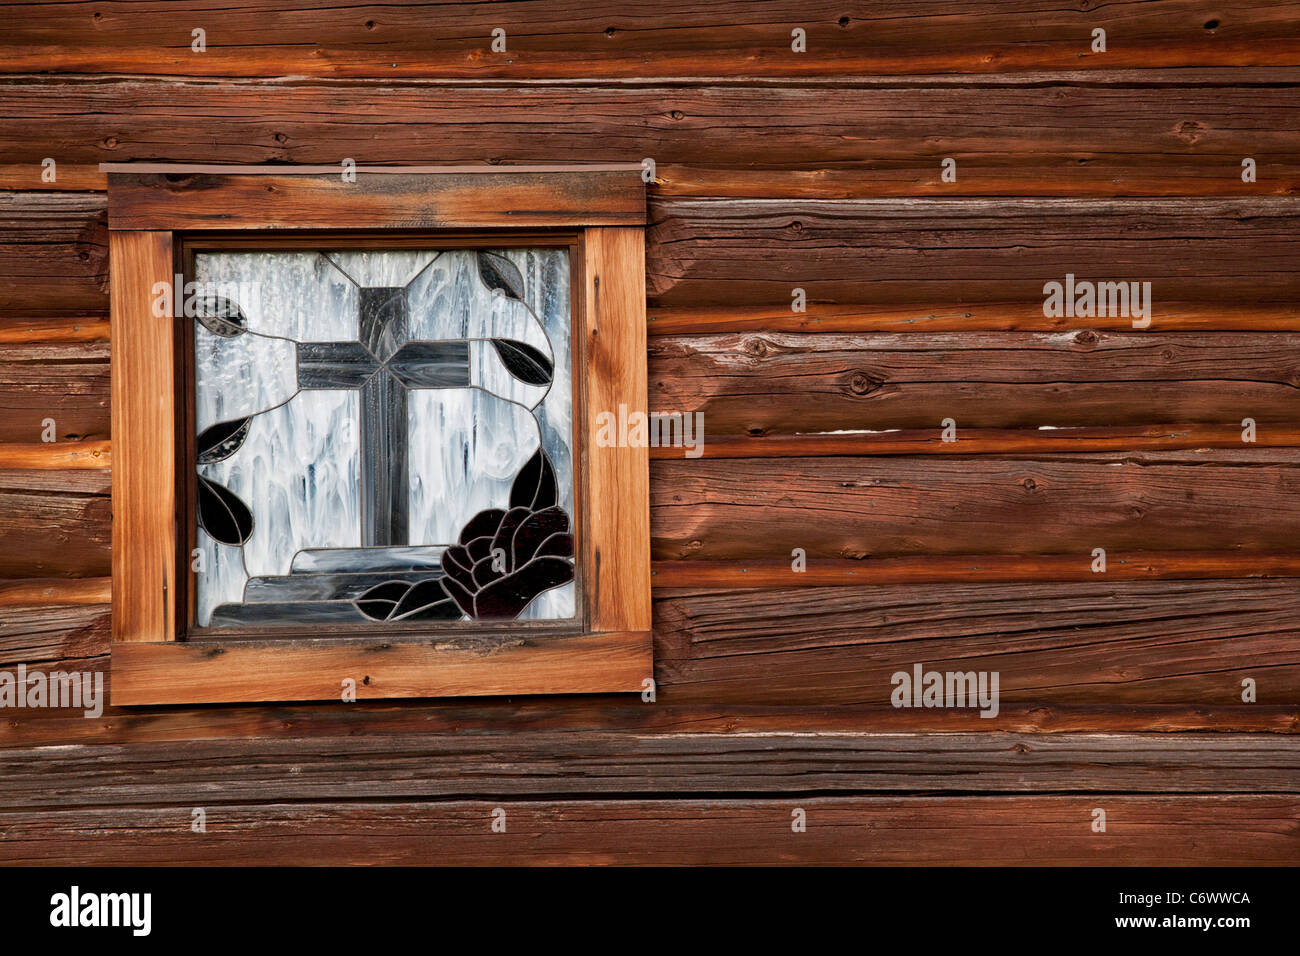 Log Chapel Stained Glass Window Stock Photo